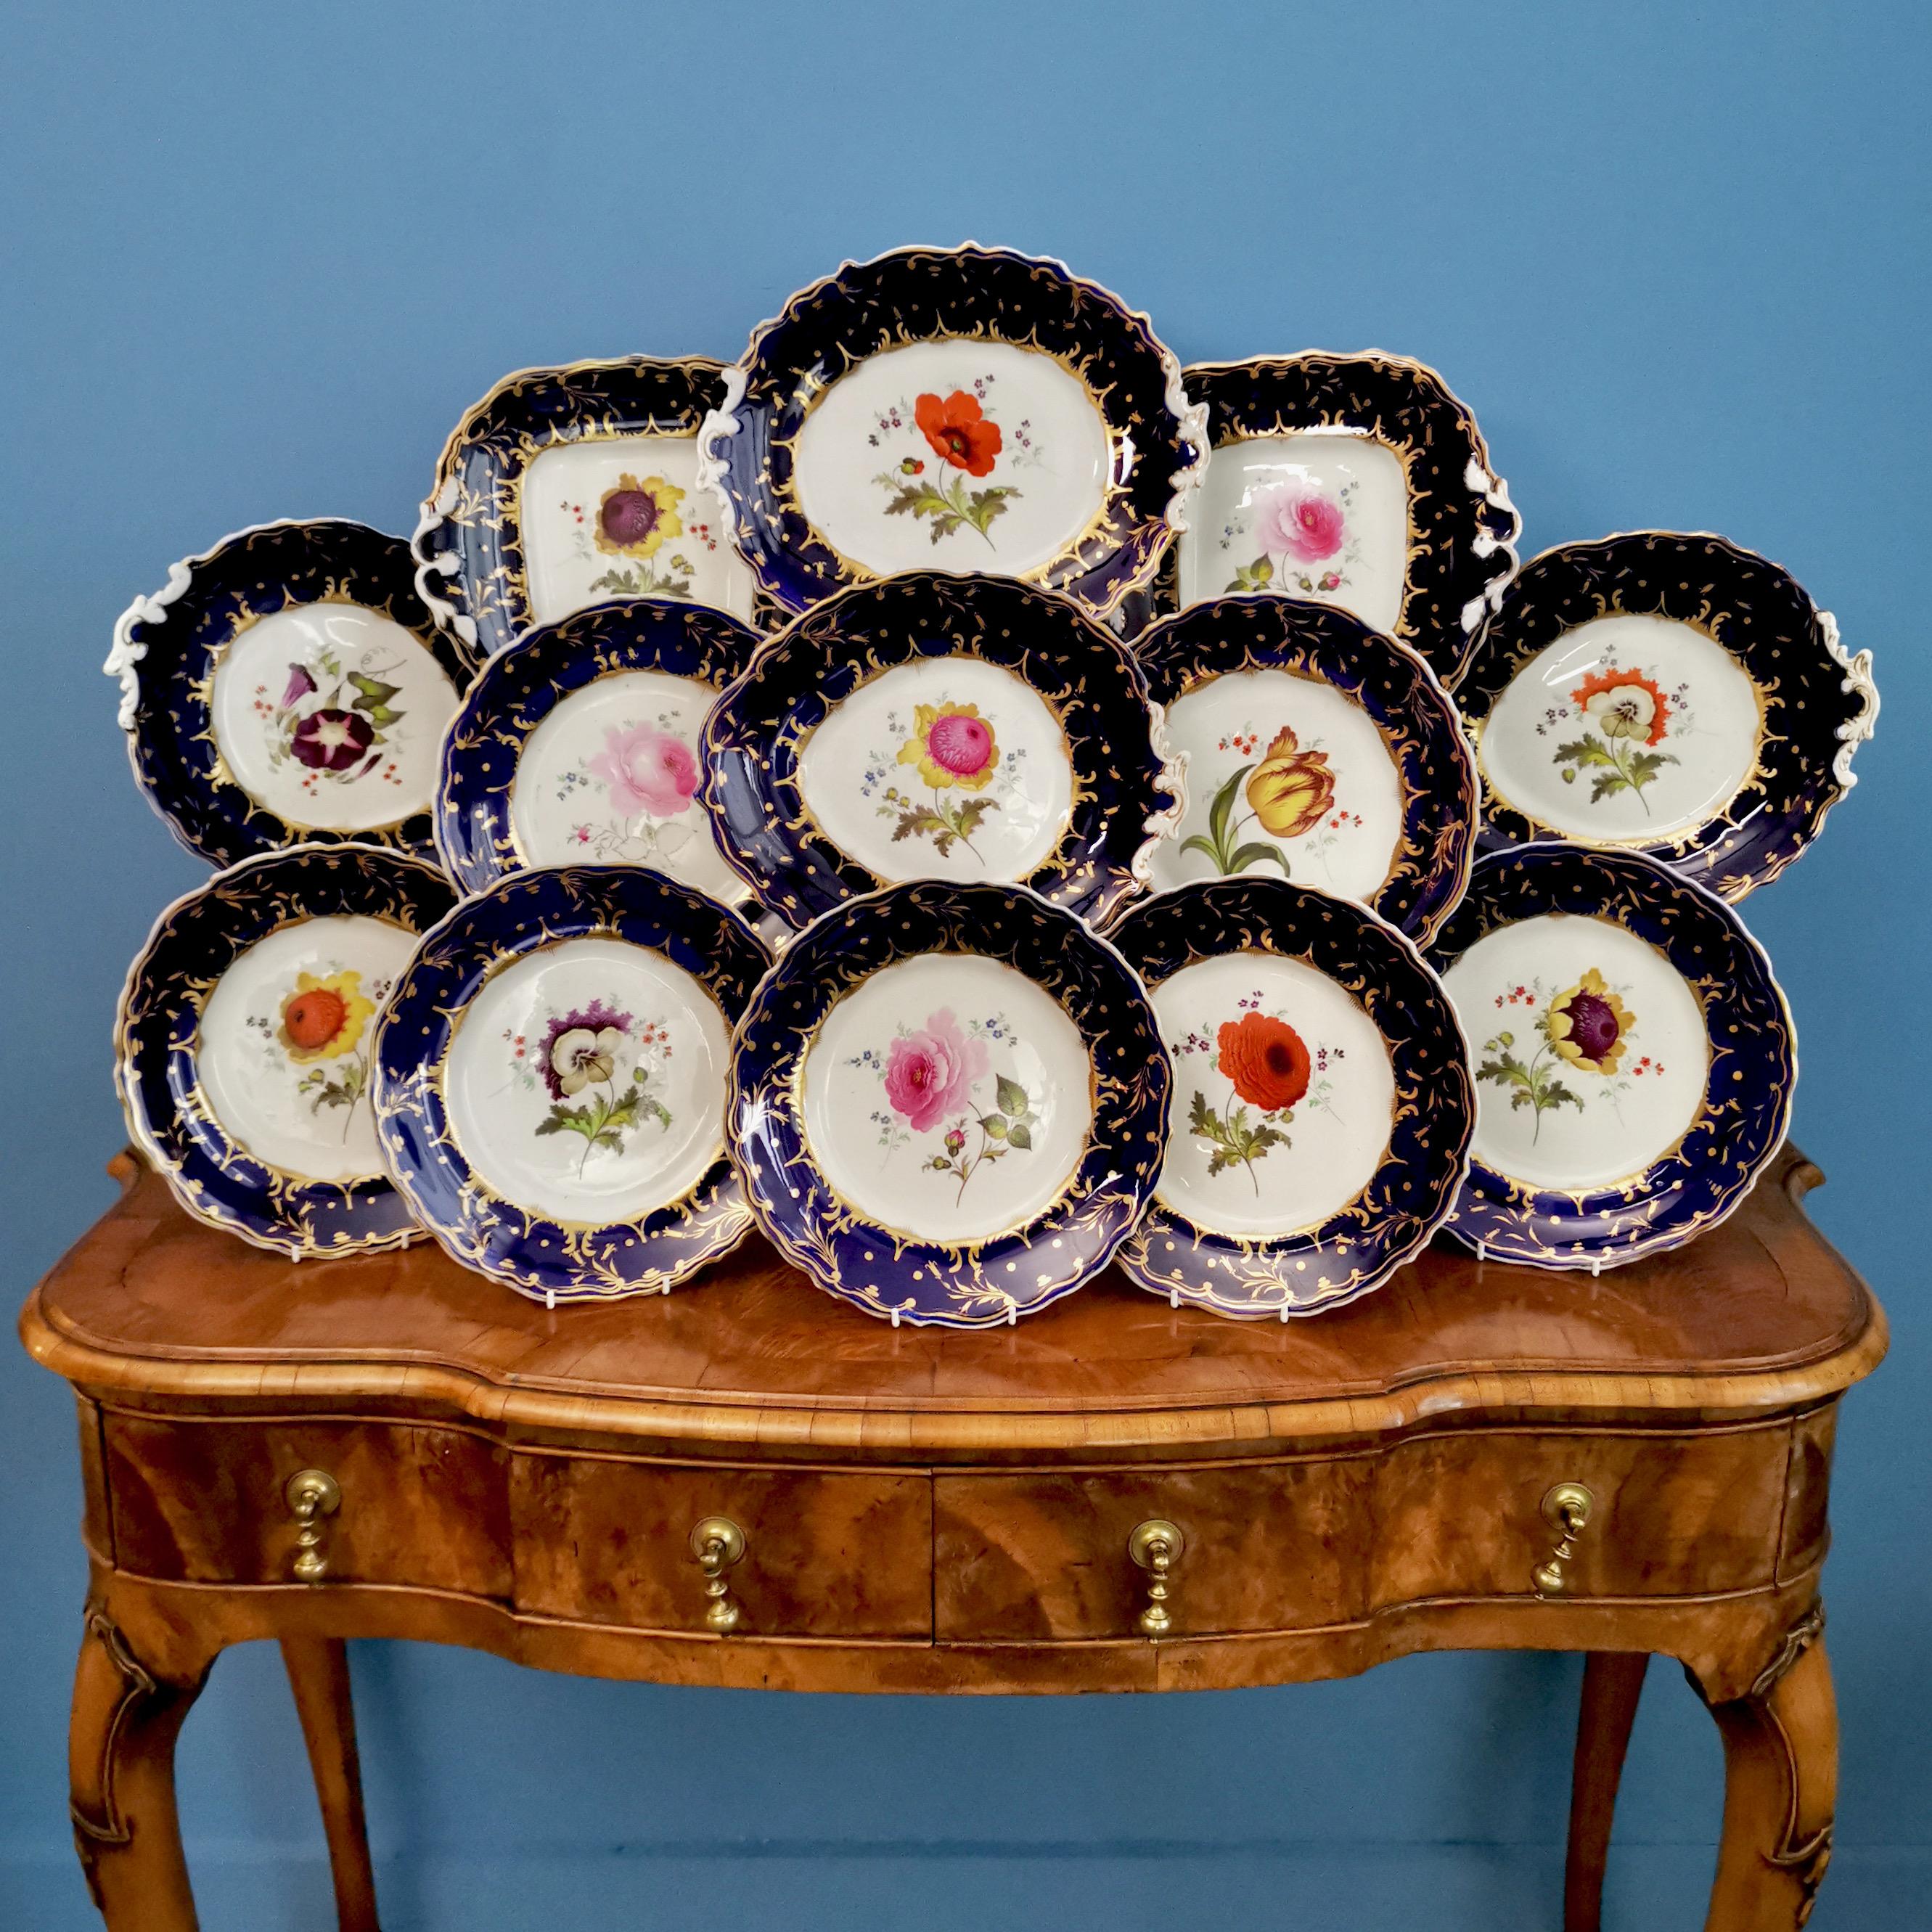 On offer is a dessert service made by a Staffordshire factory in circa 1830. The service might be made by Samuel Alcock but there is no proof of this. The items have a deep cobalt blue ground and stunning botanical paintings. The service consists of